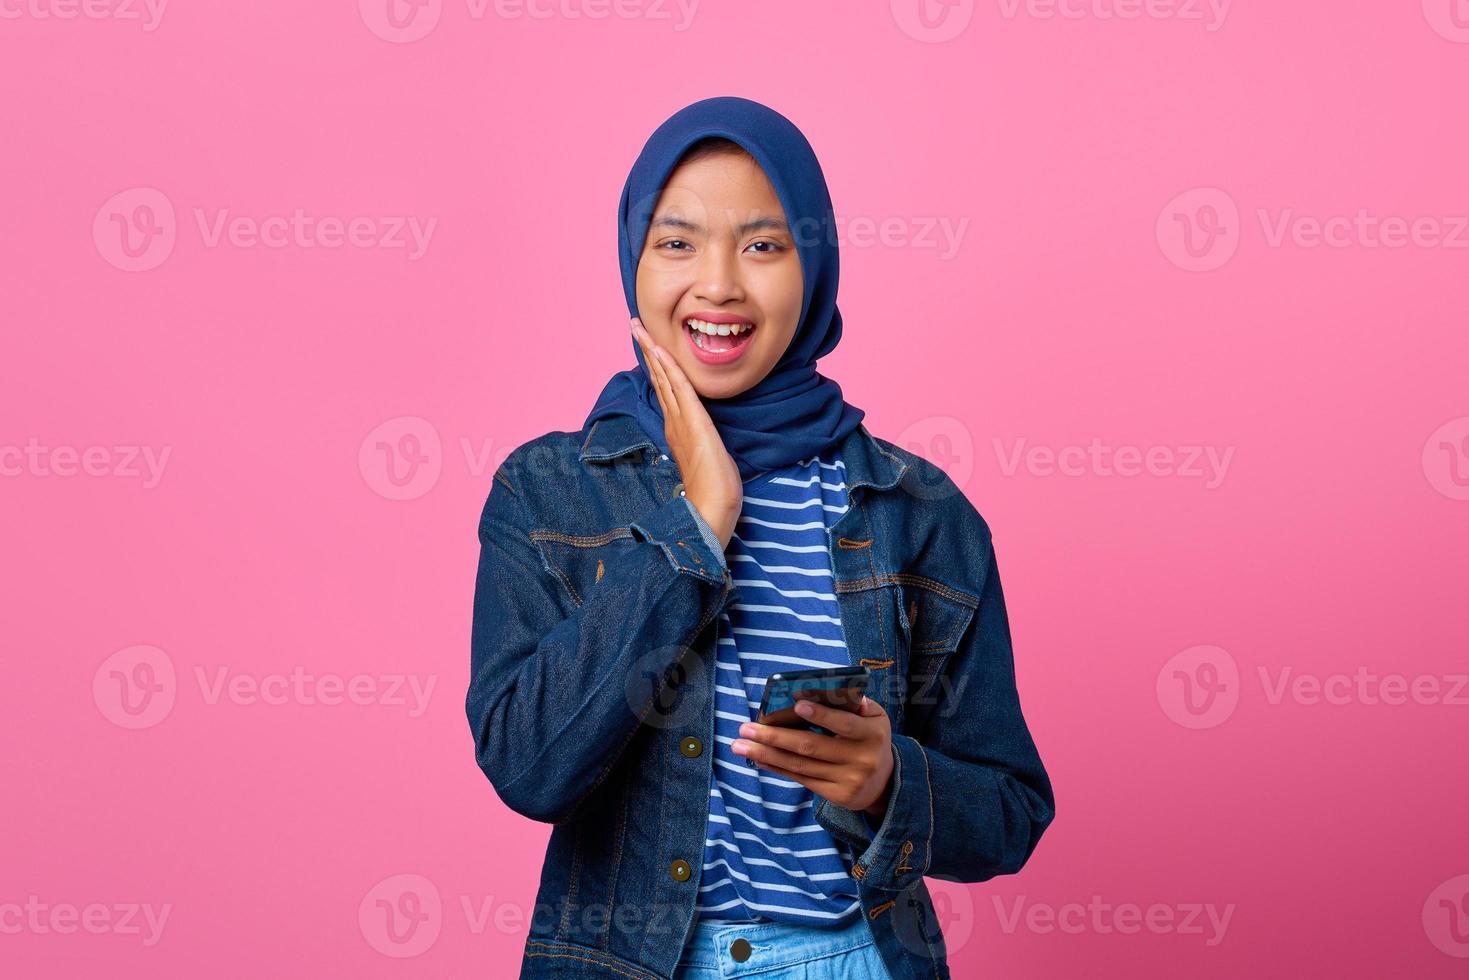 Portrait of smiling young Asian woman holding mobile phone with hand on her cheeks photo